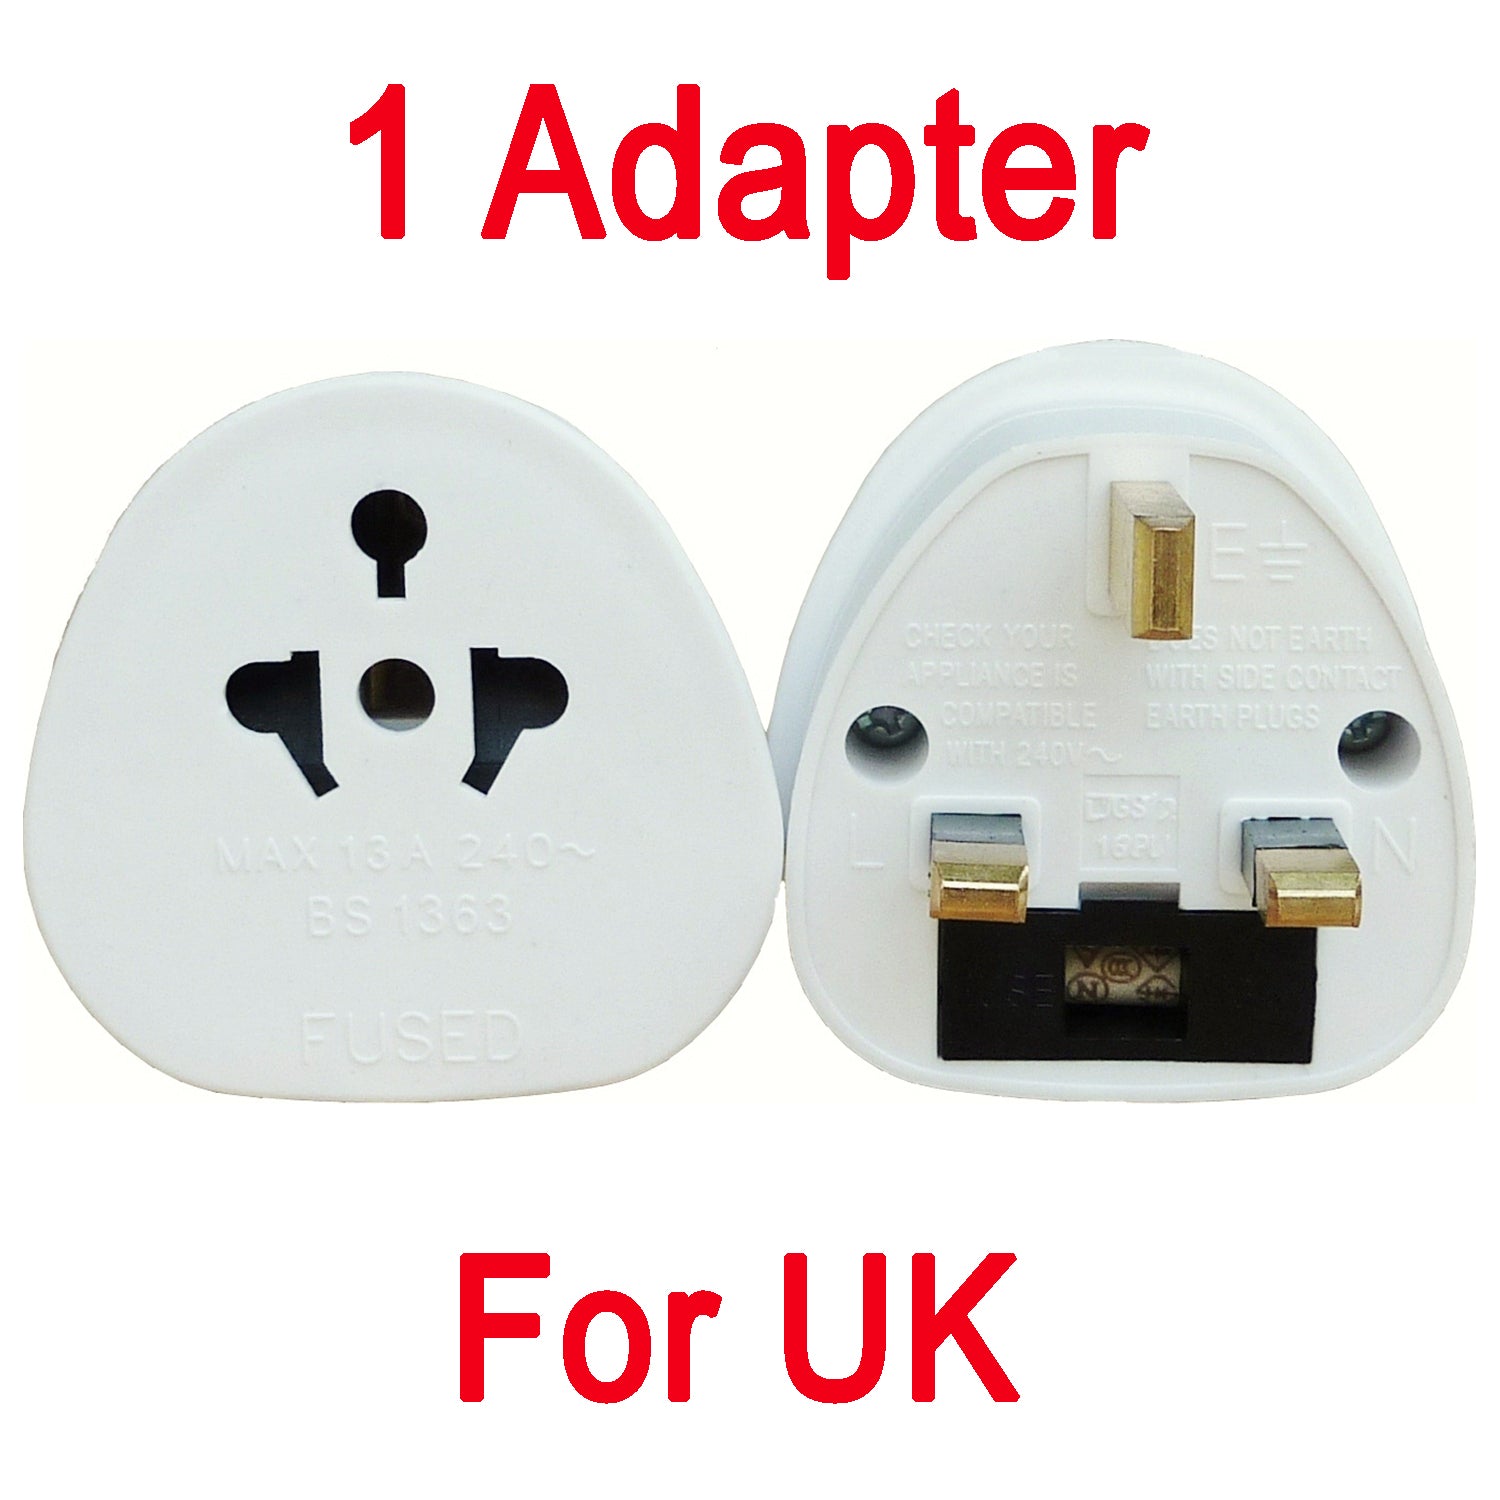 Travel adpater for use in uk travel plug